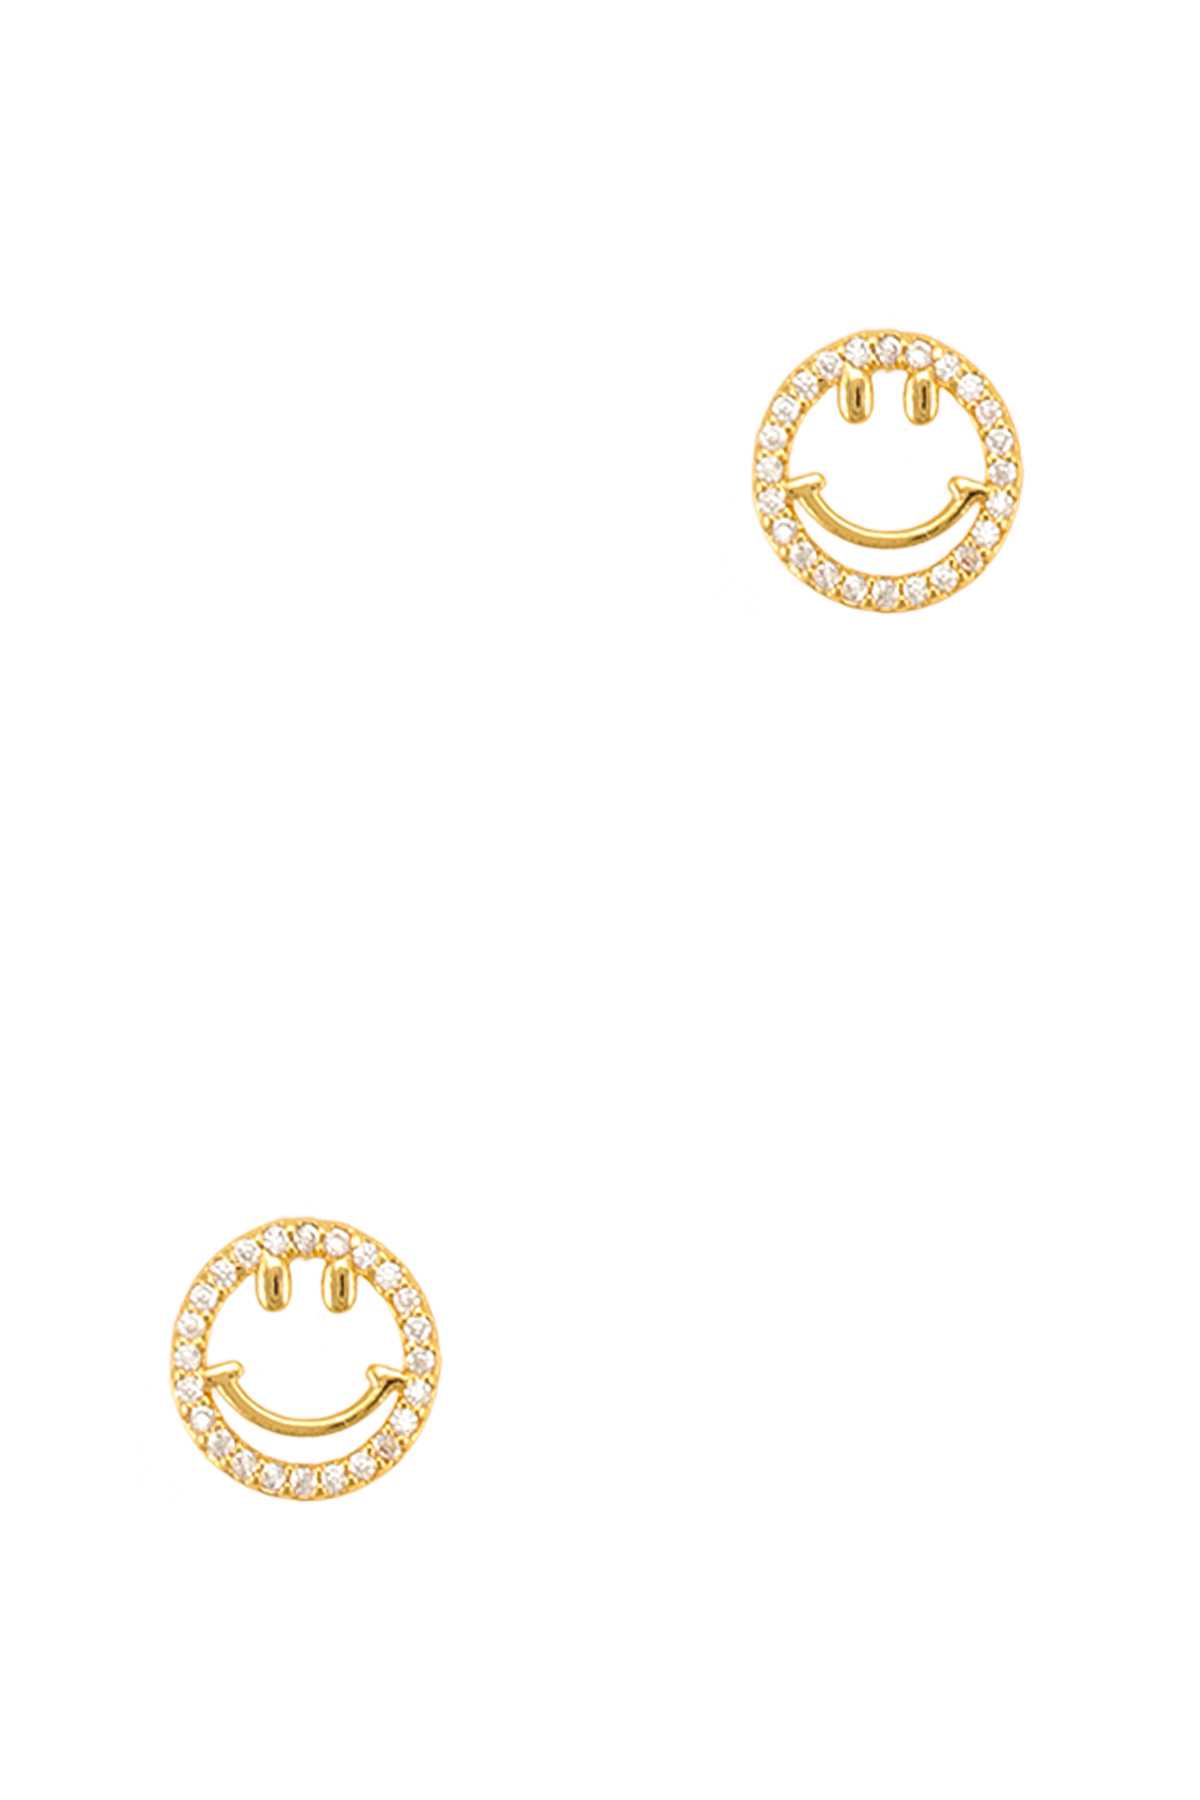 Gold Dipped Rhinestone Smile Face Earring